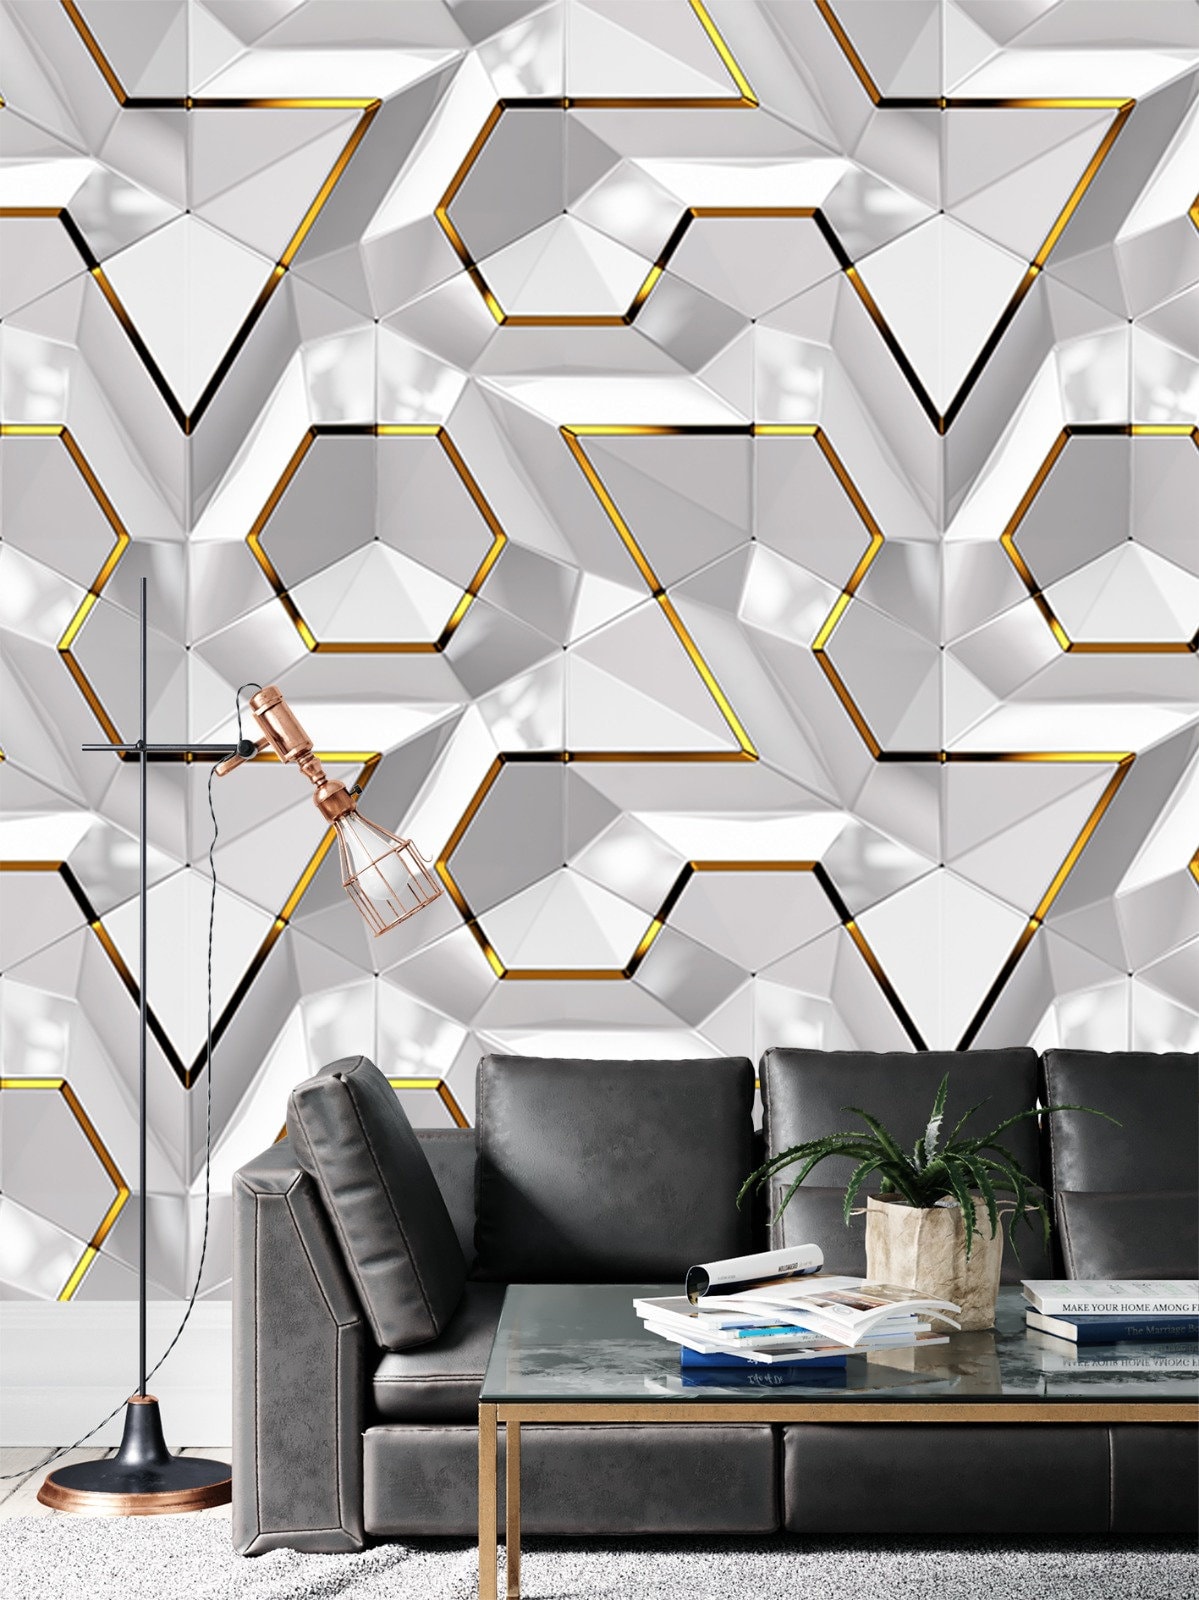 3d Wall Panels Peel and Stick - Etsy UK